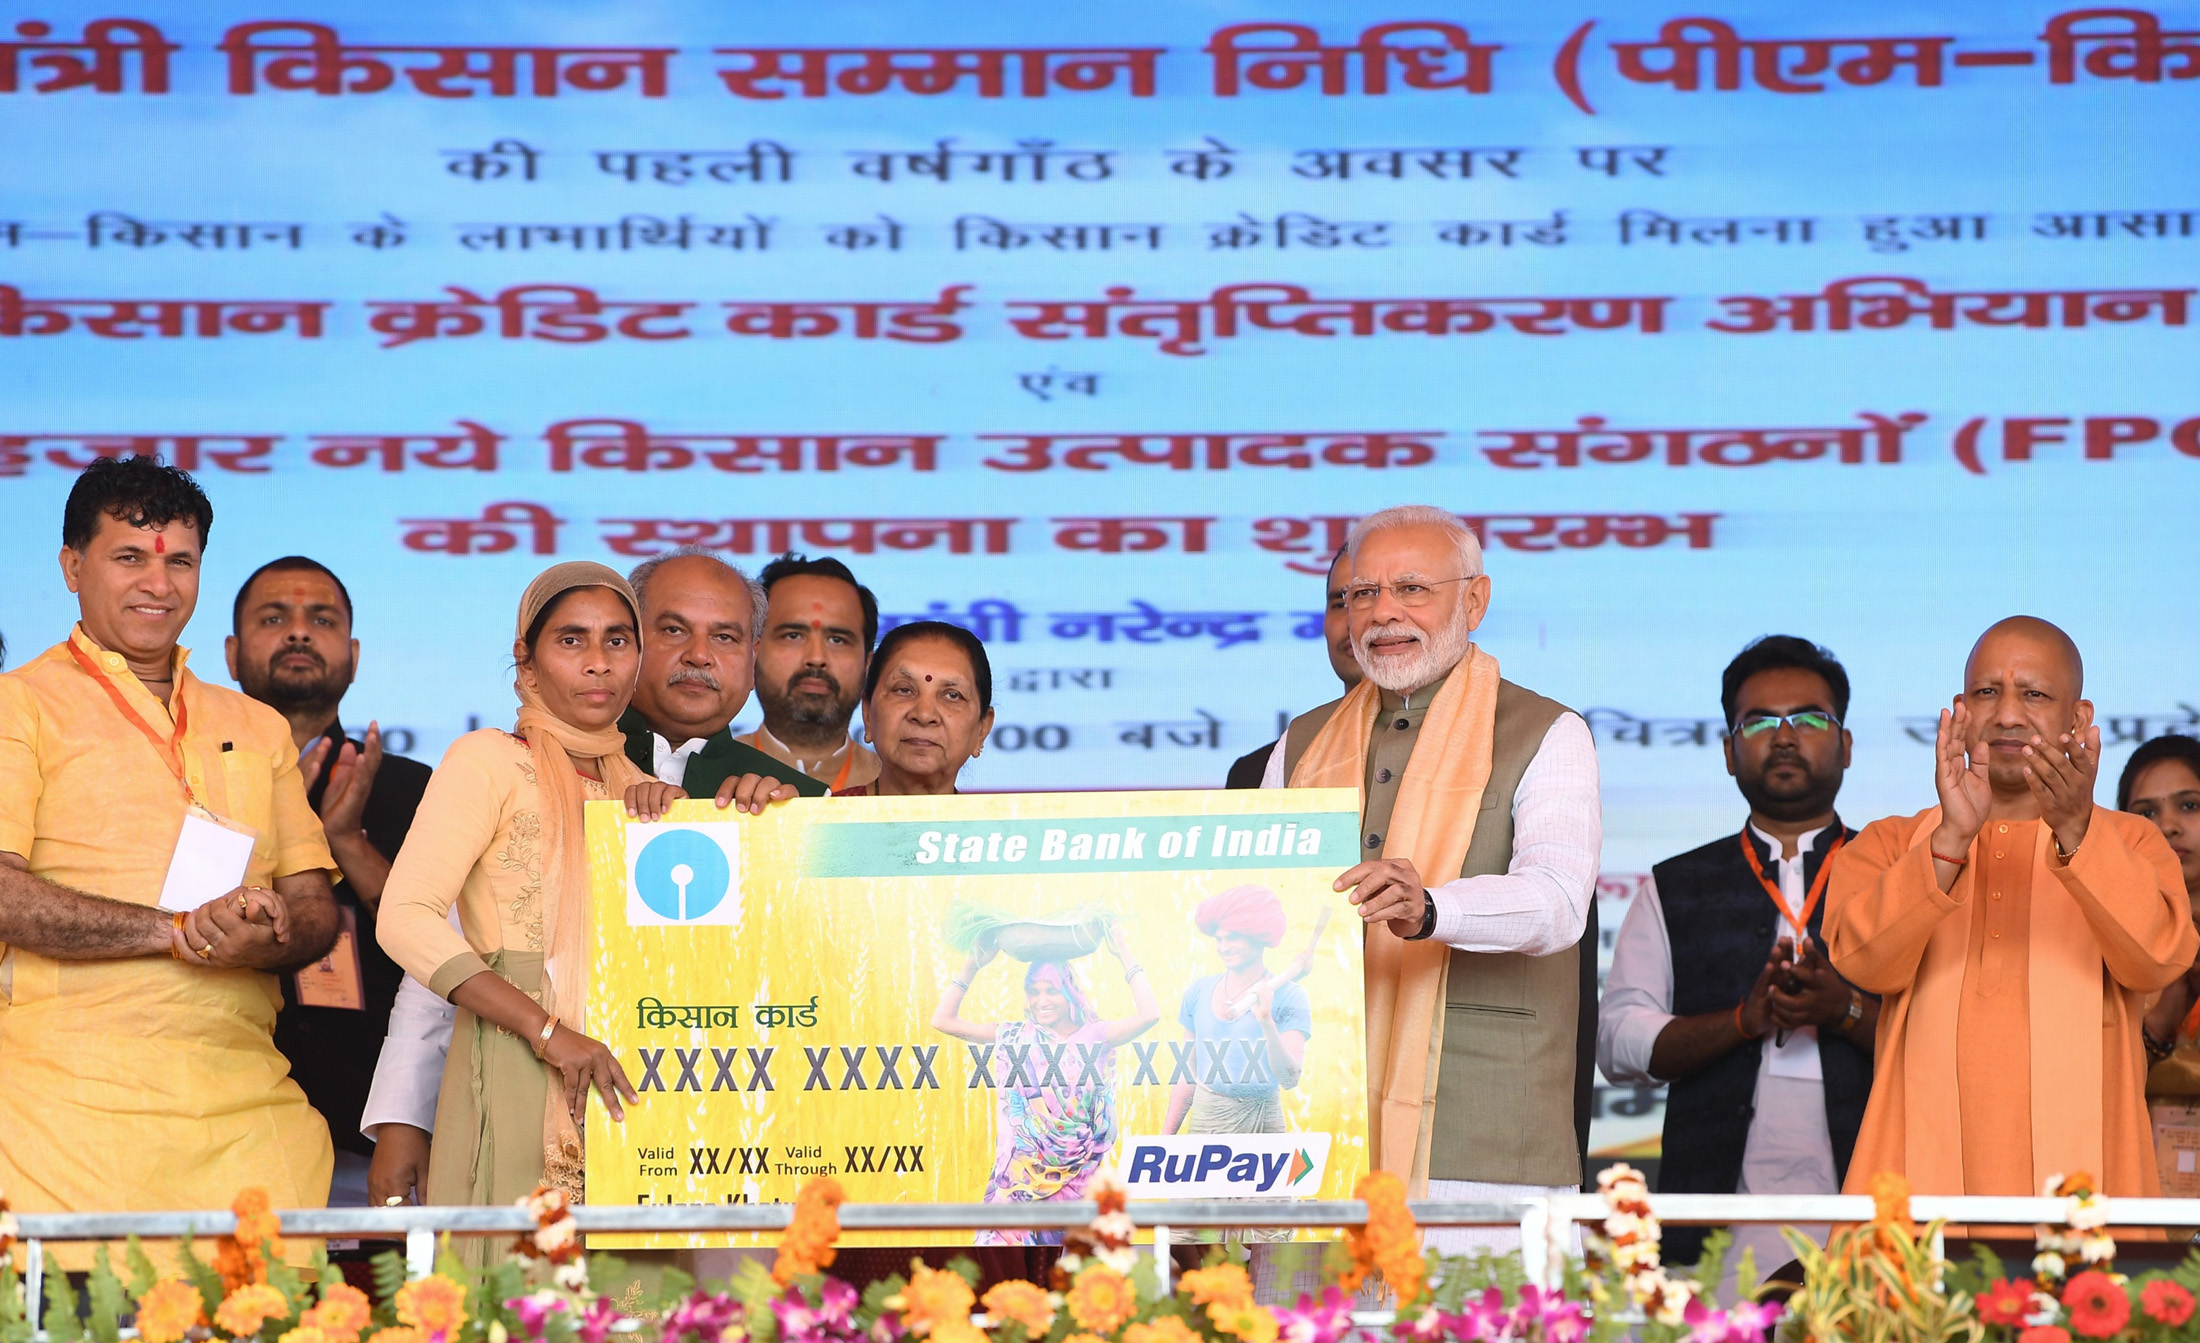 Prime Minister lays foundation stone for the Bundelkhand Expressway;Launches 10,000 Farmer Producer Organisations